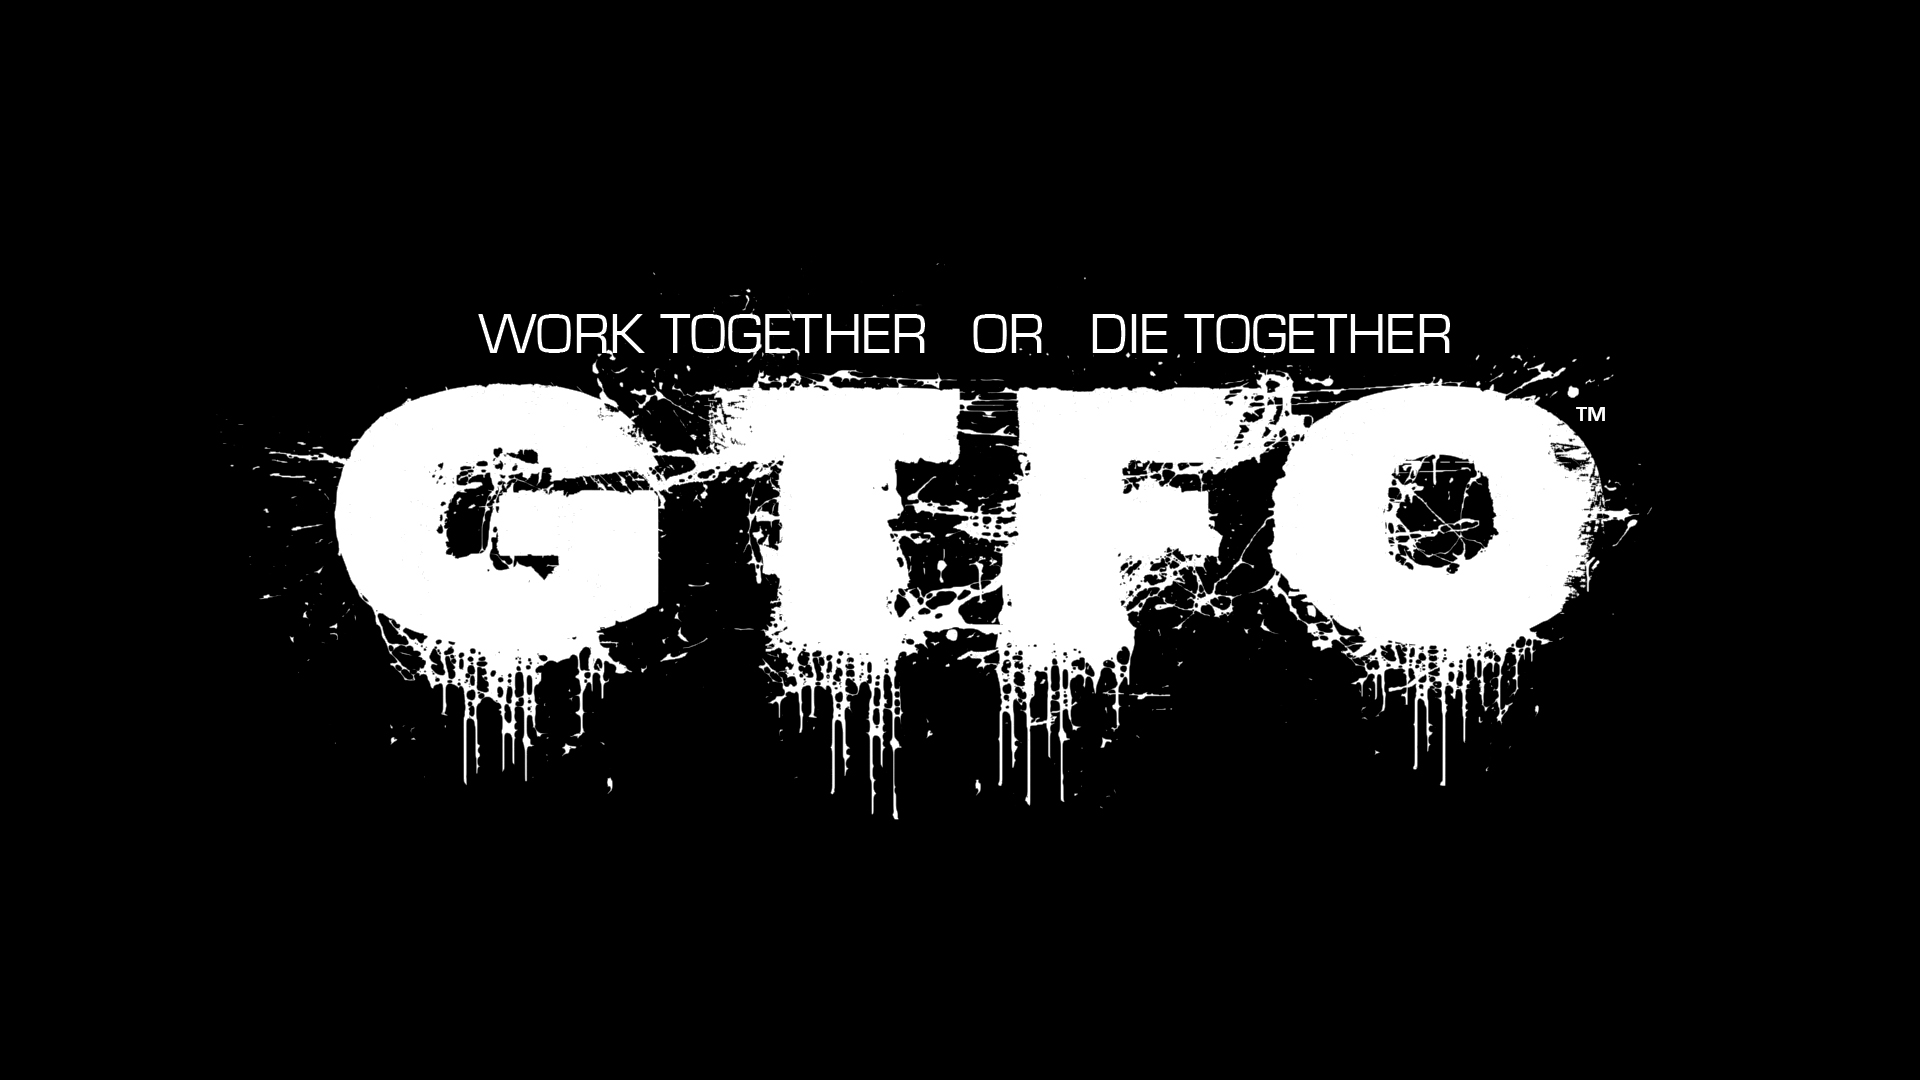 free download gtfo video game